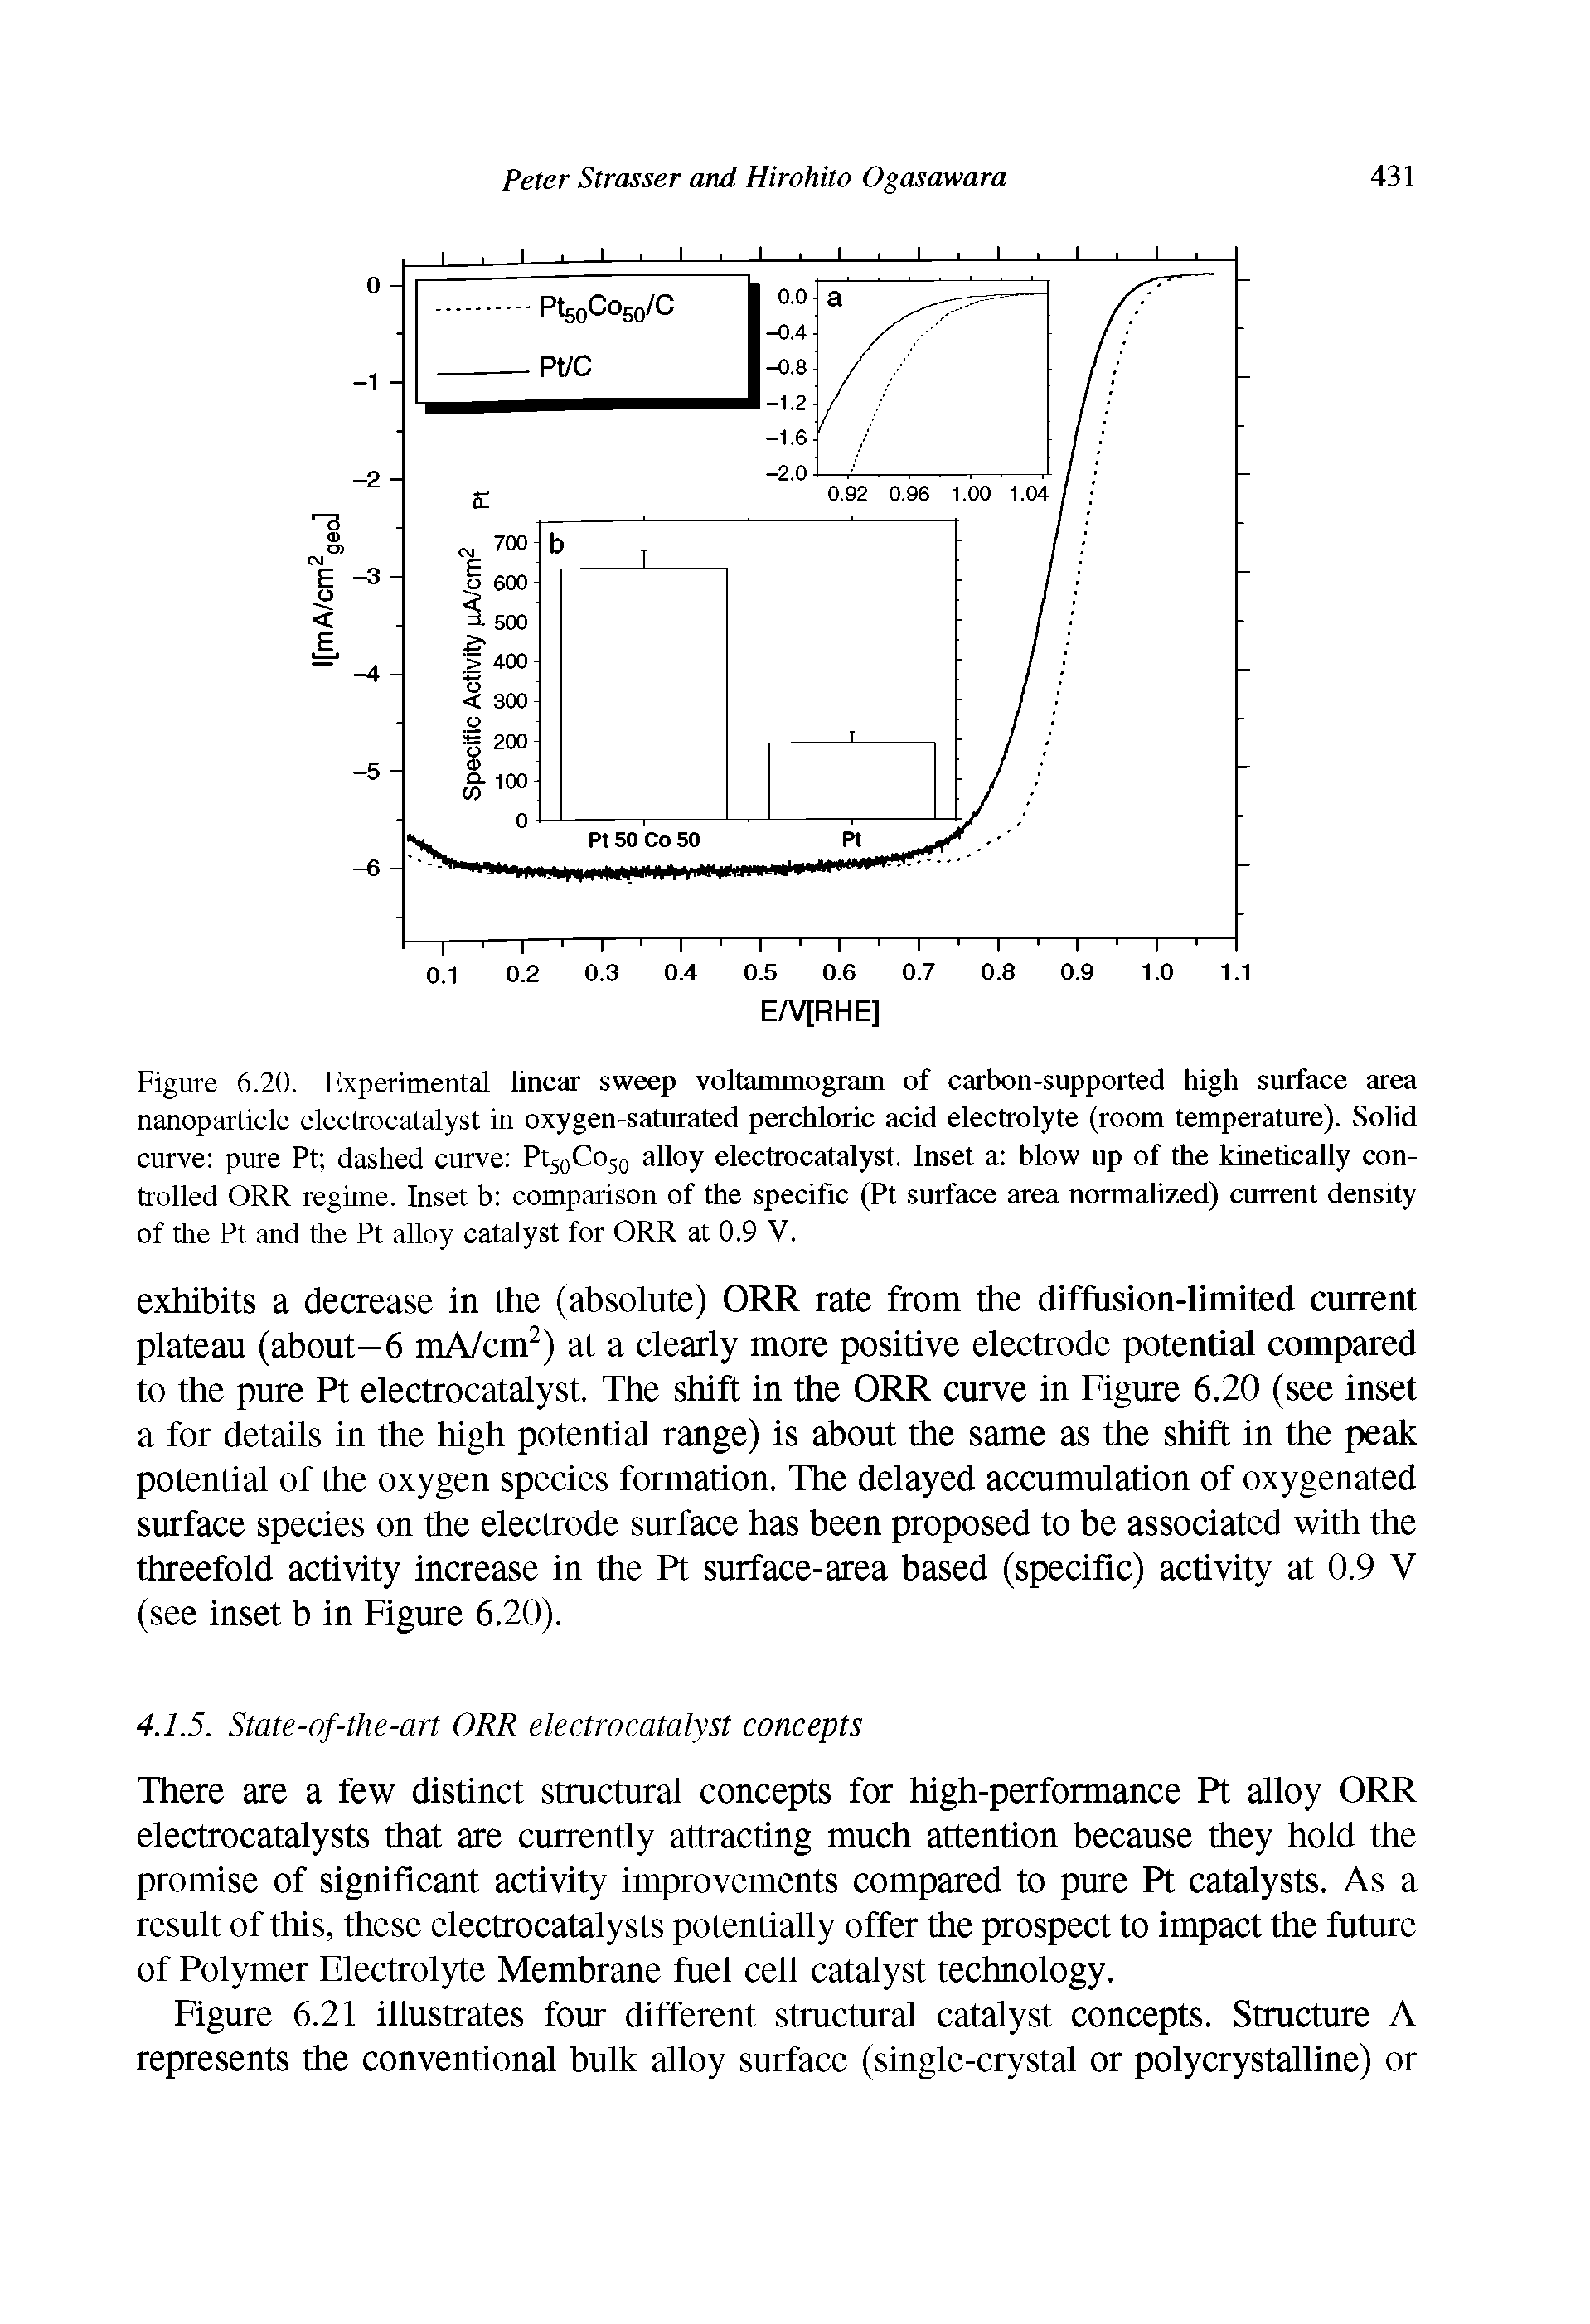 Figure 6.20. Experimental linear sweep voltammogram of carbon-supported high surface area nanoparticle electrocatalyst in oxygen-saturated perchloric acid electrolyte (room temperature). Solid curve pure Pt dashed curve Pt50Co50 alloy electrocatalyst. Inset a blow up of the kinetically controlled ORR regime. Inset b comparison of the specific (Pt surface area normalized) current density of the Pt and the Pt alloy catalyst for ORR at 0.9 V.